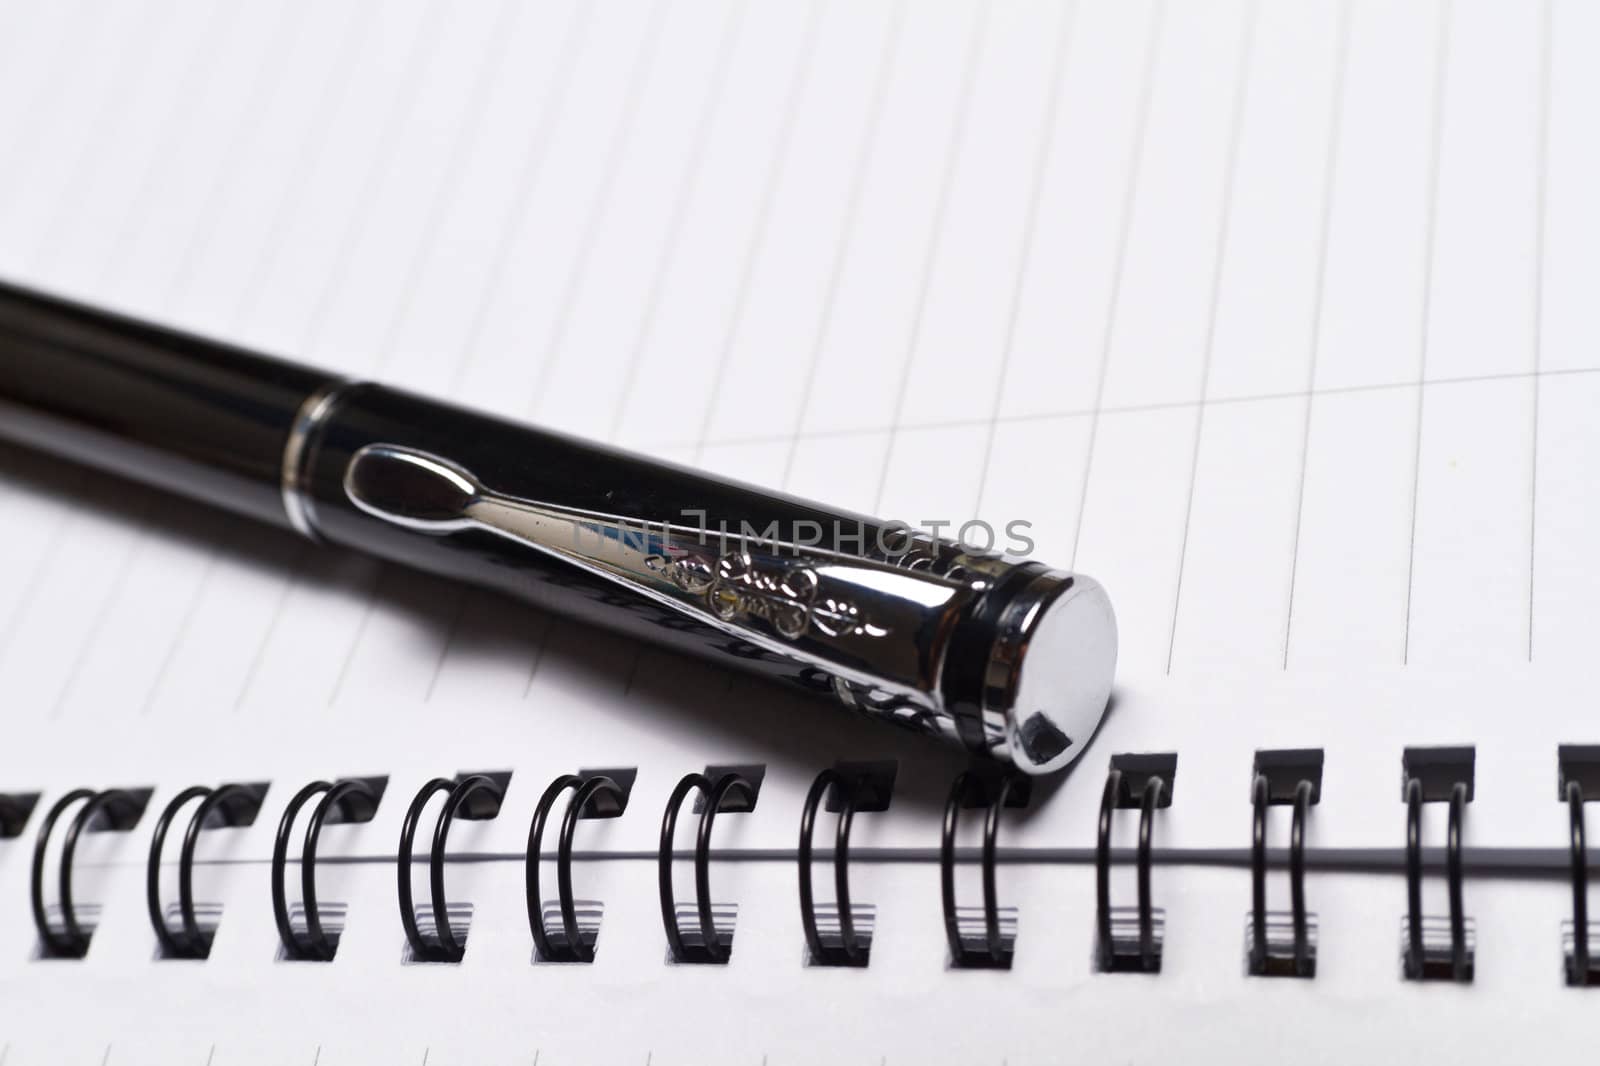 a close up view of an opened note book and a capped pen